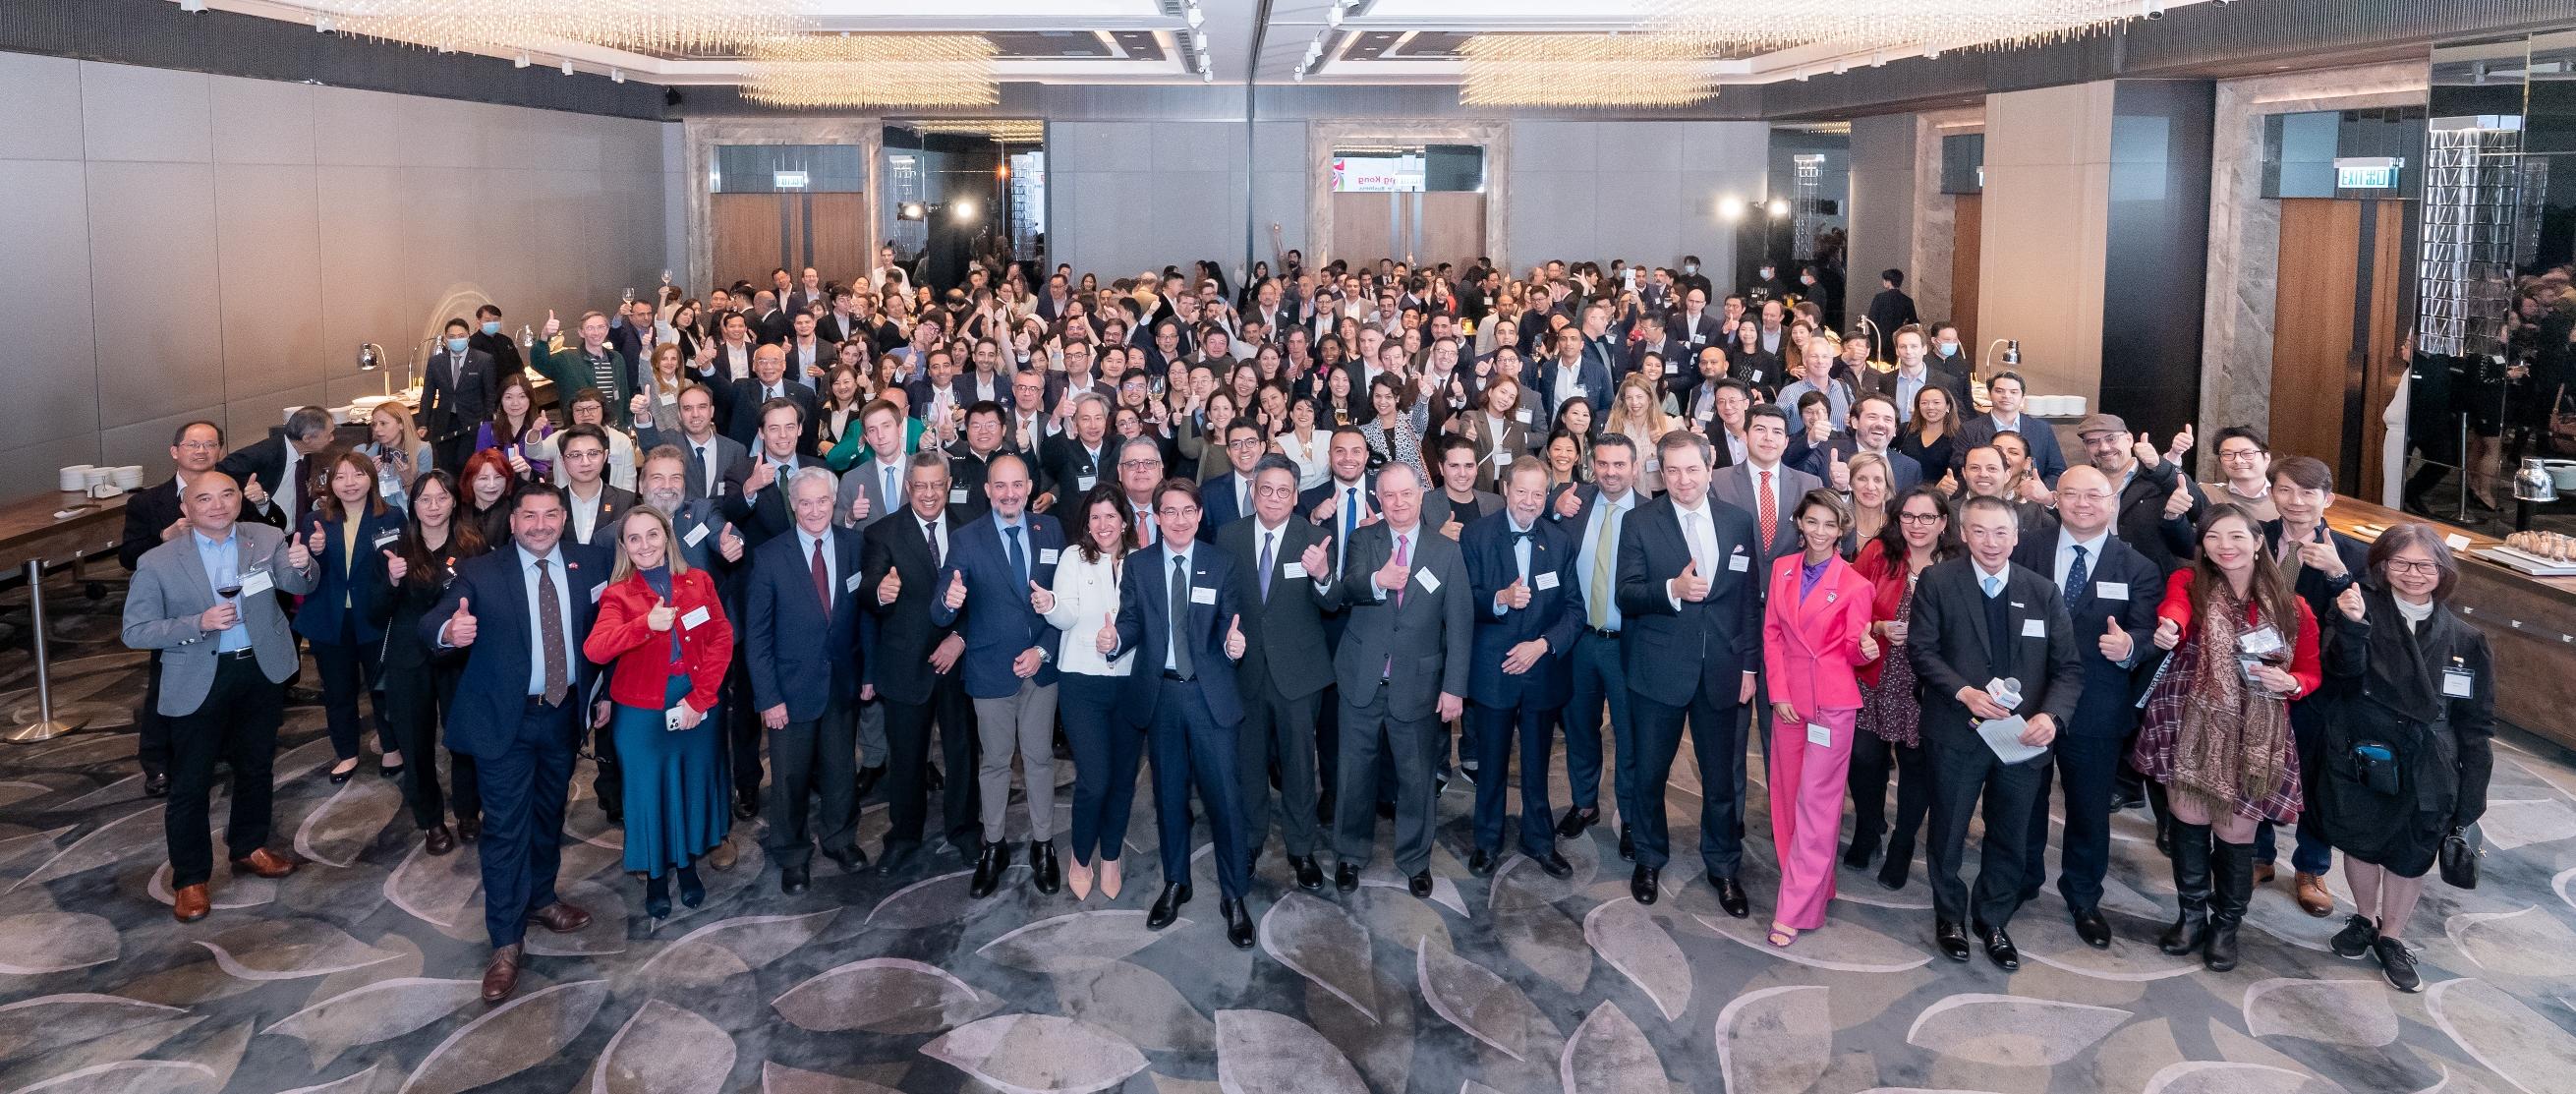 Invest Hong Kong today (March 12) hosted the Ibero-American Community Networking Reception for the Ibero-American business community in recognition of their lasting support of the city. Photo shows the participants at the event.
